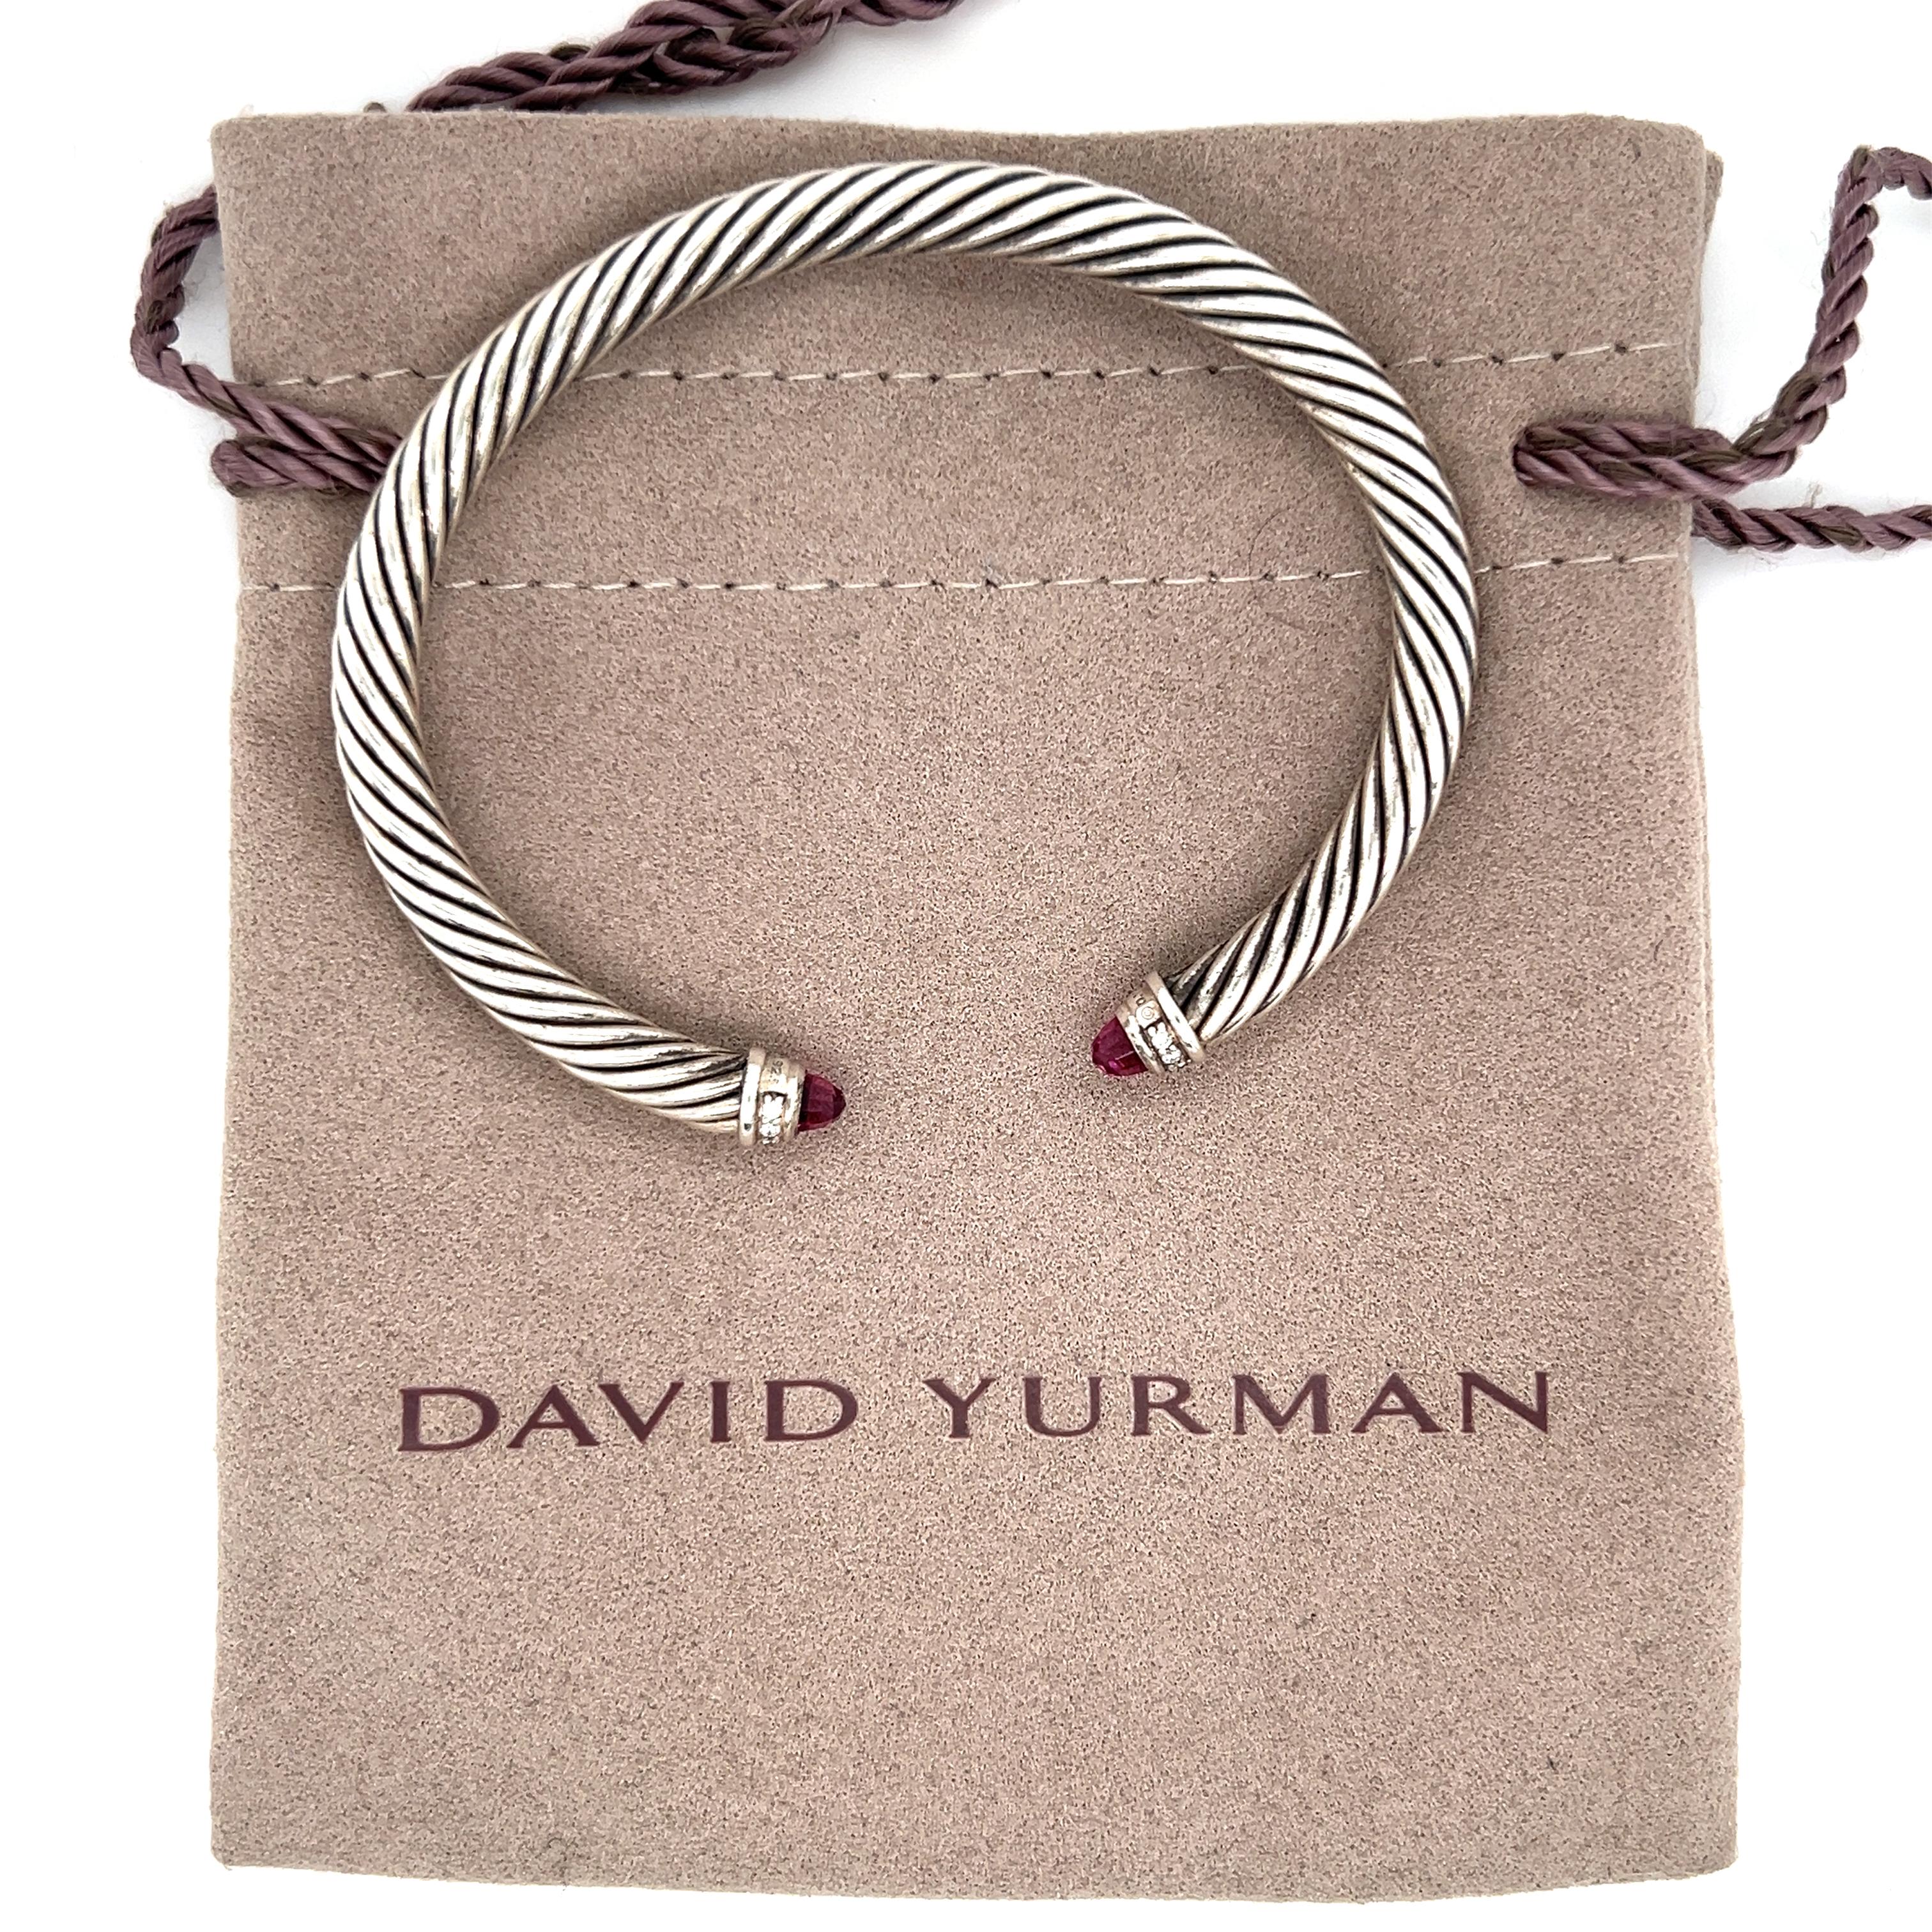 David Yurman Sterling Silver 14K Yellow Gold and Citrine 5mm Classic Cable Bangle Bracelet

Sterling silver & 14k yellow gold
Weight: 26.19 grams
Width: 5mm
Approx. 6.75 inches

SHIPS WITH ORIGINAL DAVID YURMAN POUCH
MSRP: $695
